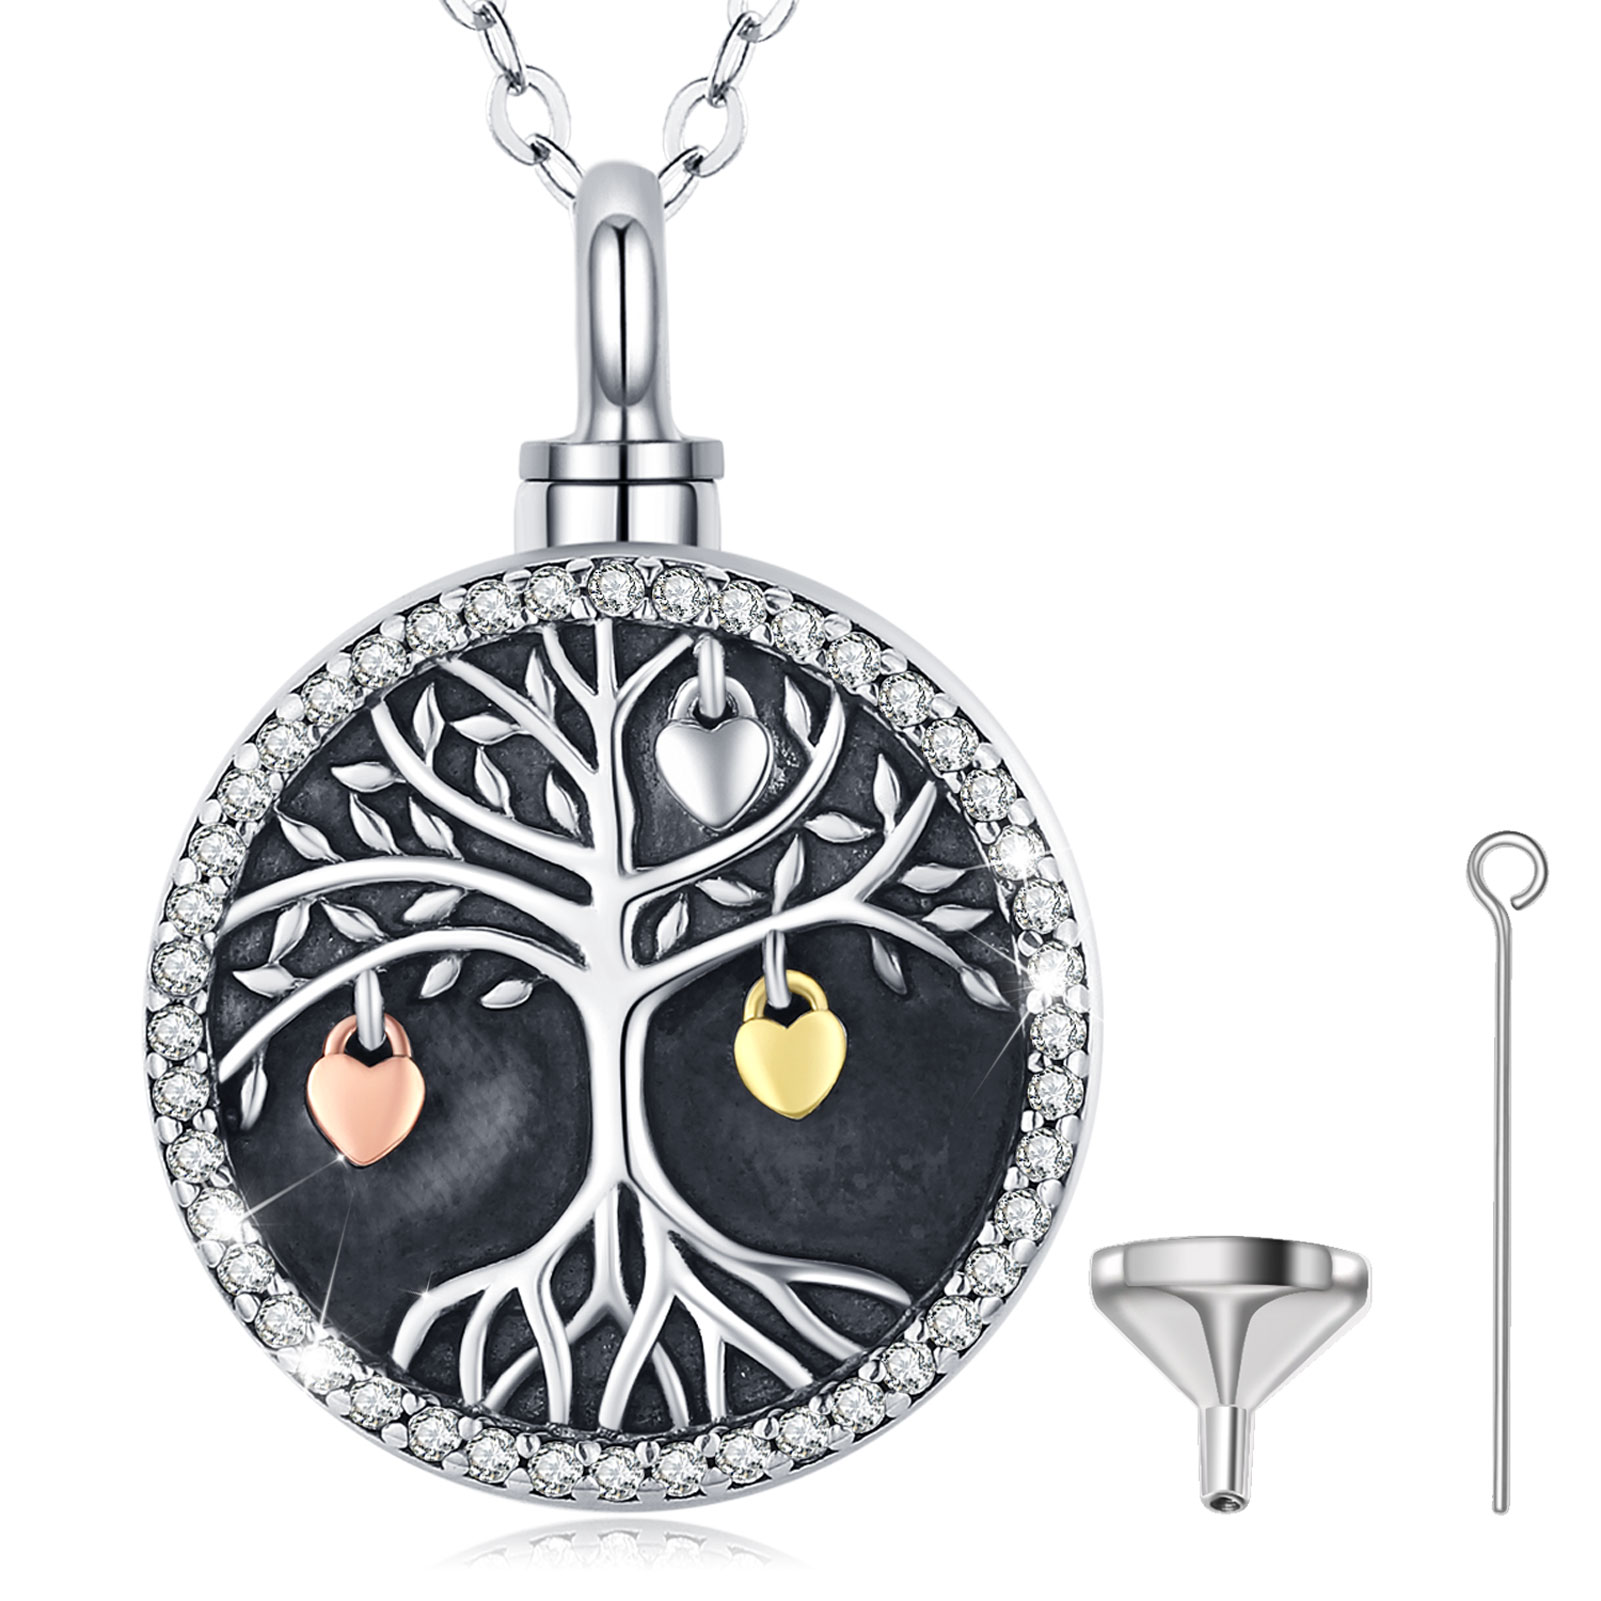 Merryshine Jewelry Cremation Jewelry S925 Sterling Silver Tree of Life Memory Urn Locket Pendant Necklace